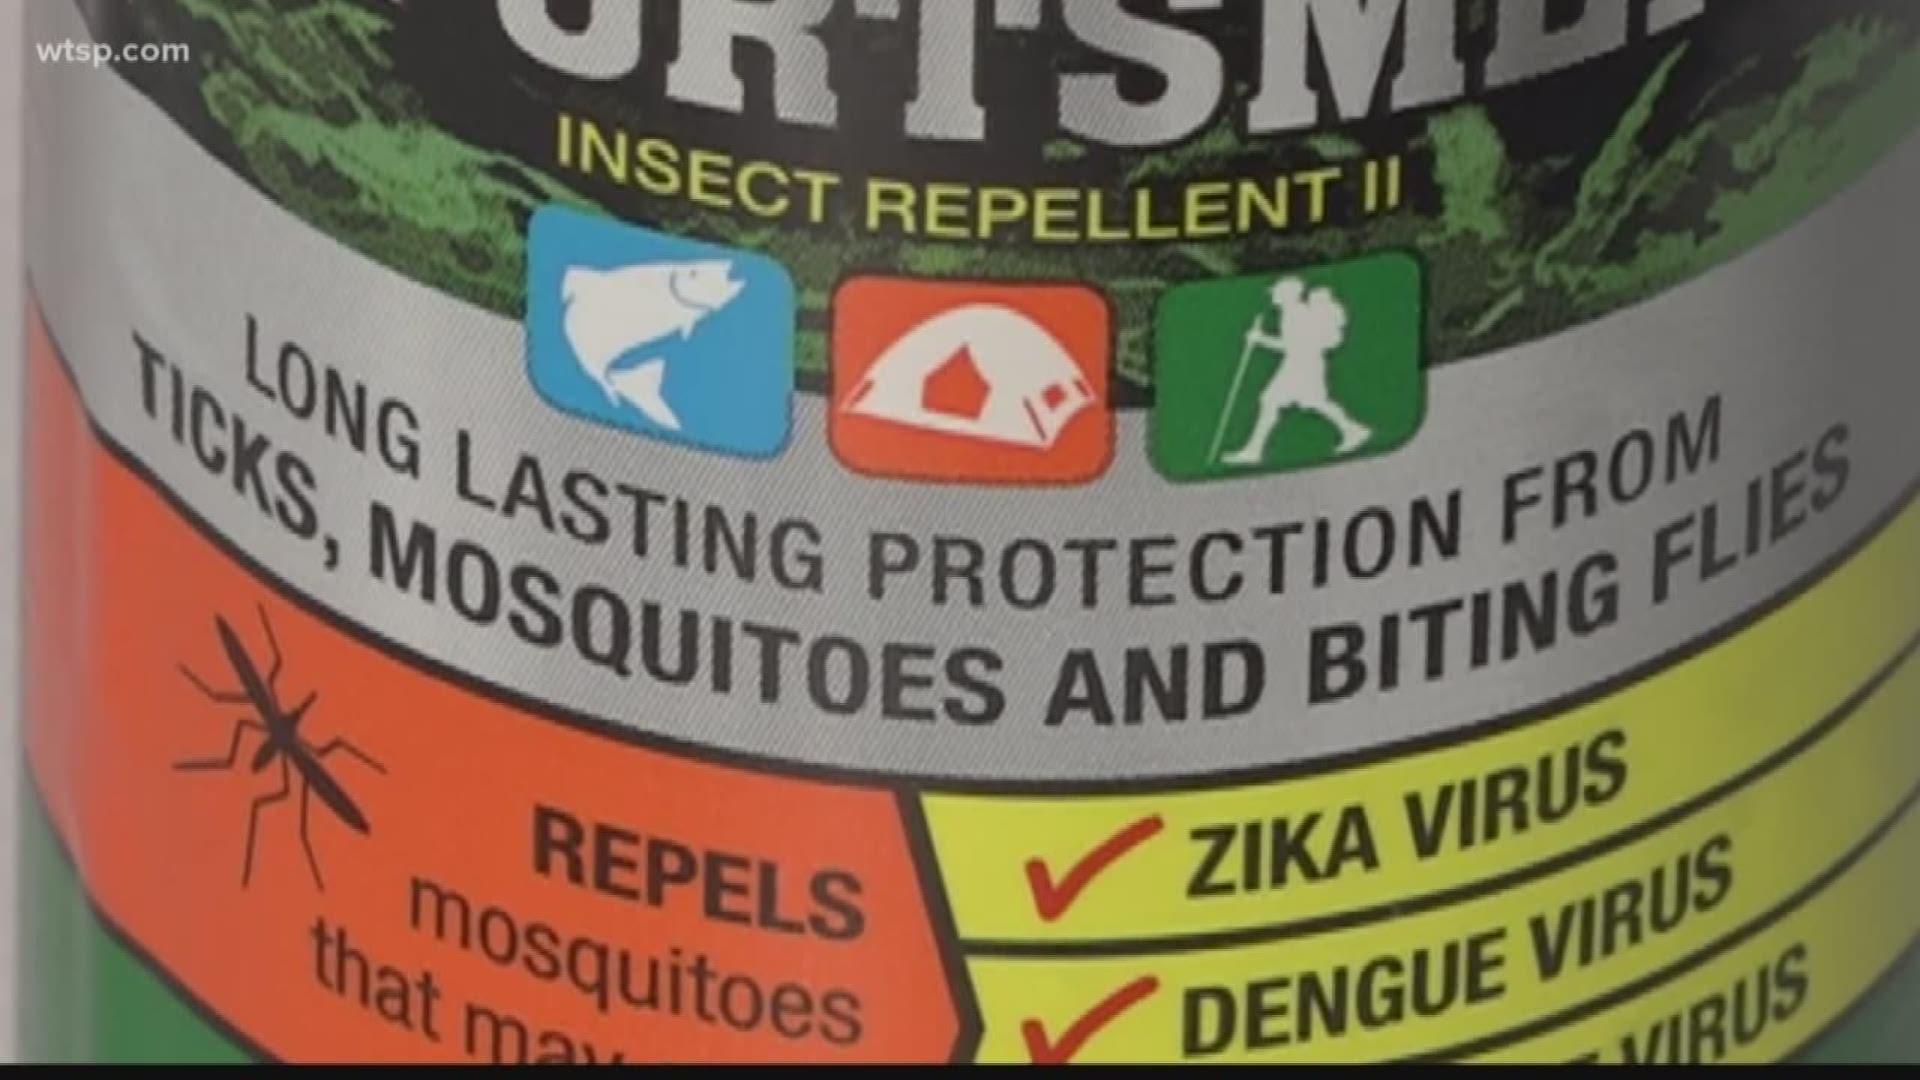 10News reporter Jenny Dean takes a look at how to keep the bugs away from your tailgate party.